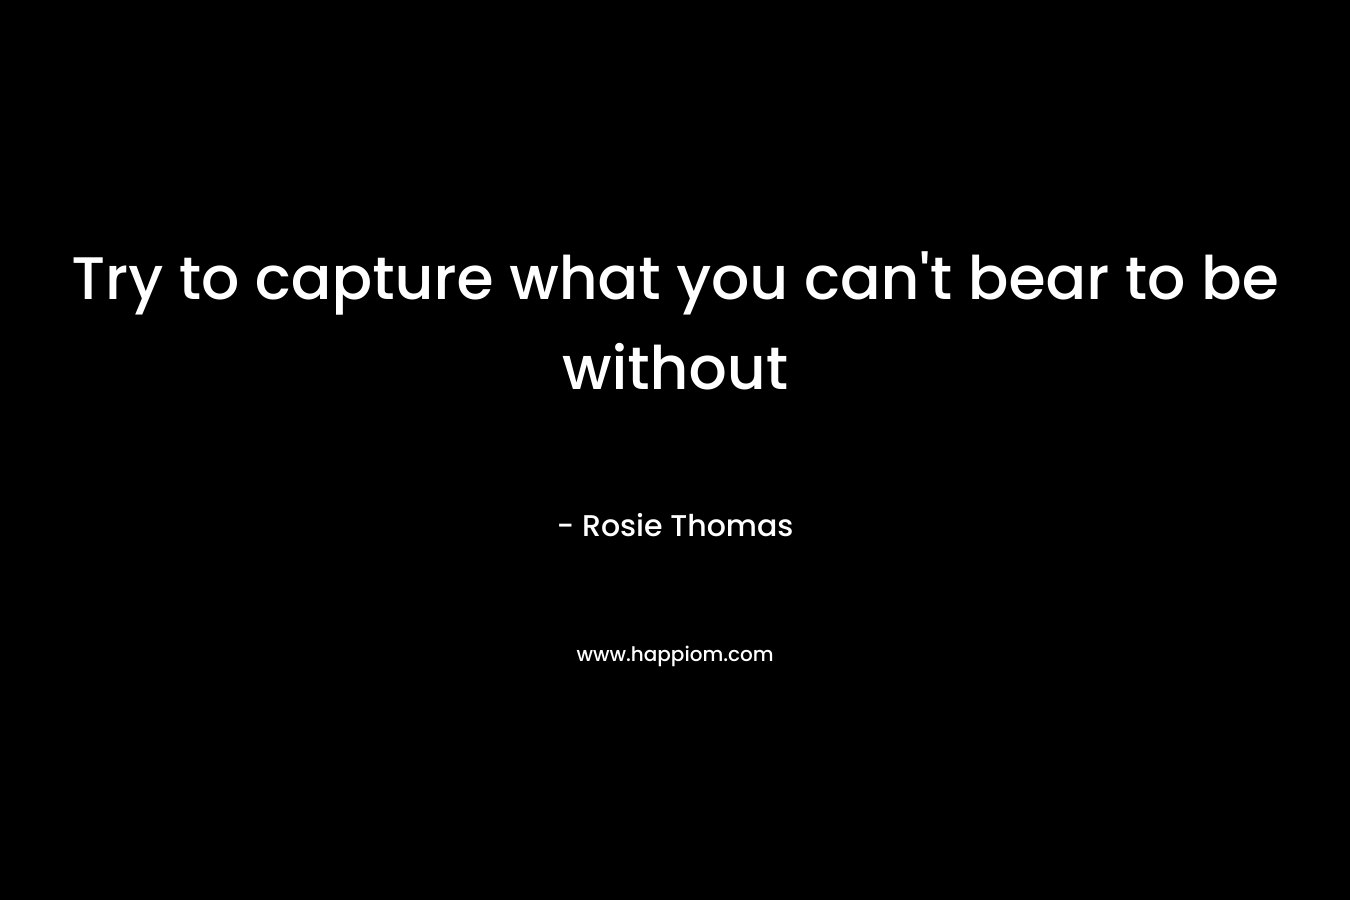 Try to capture what you can't bear to be without